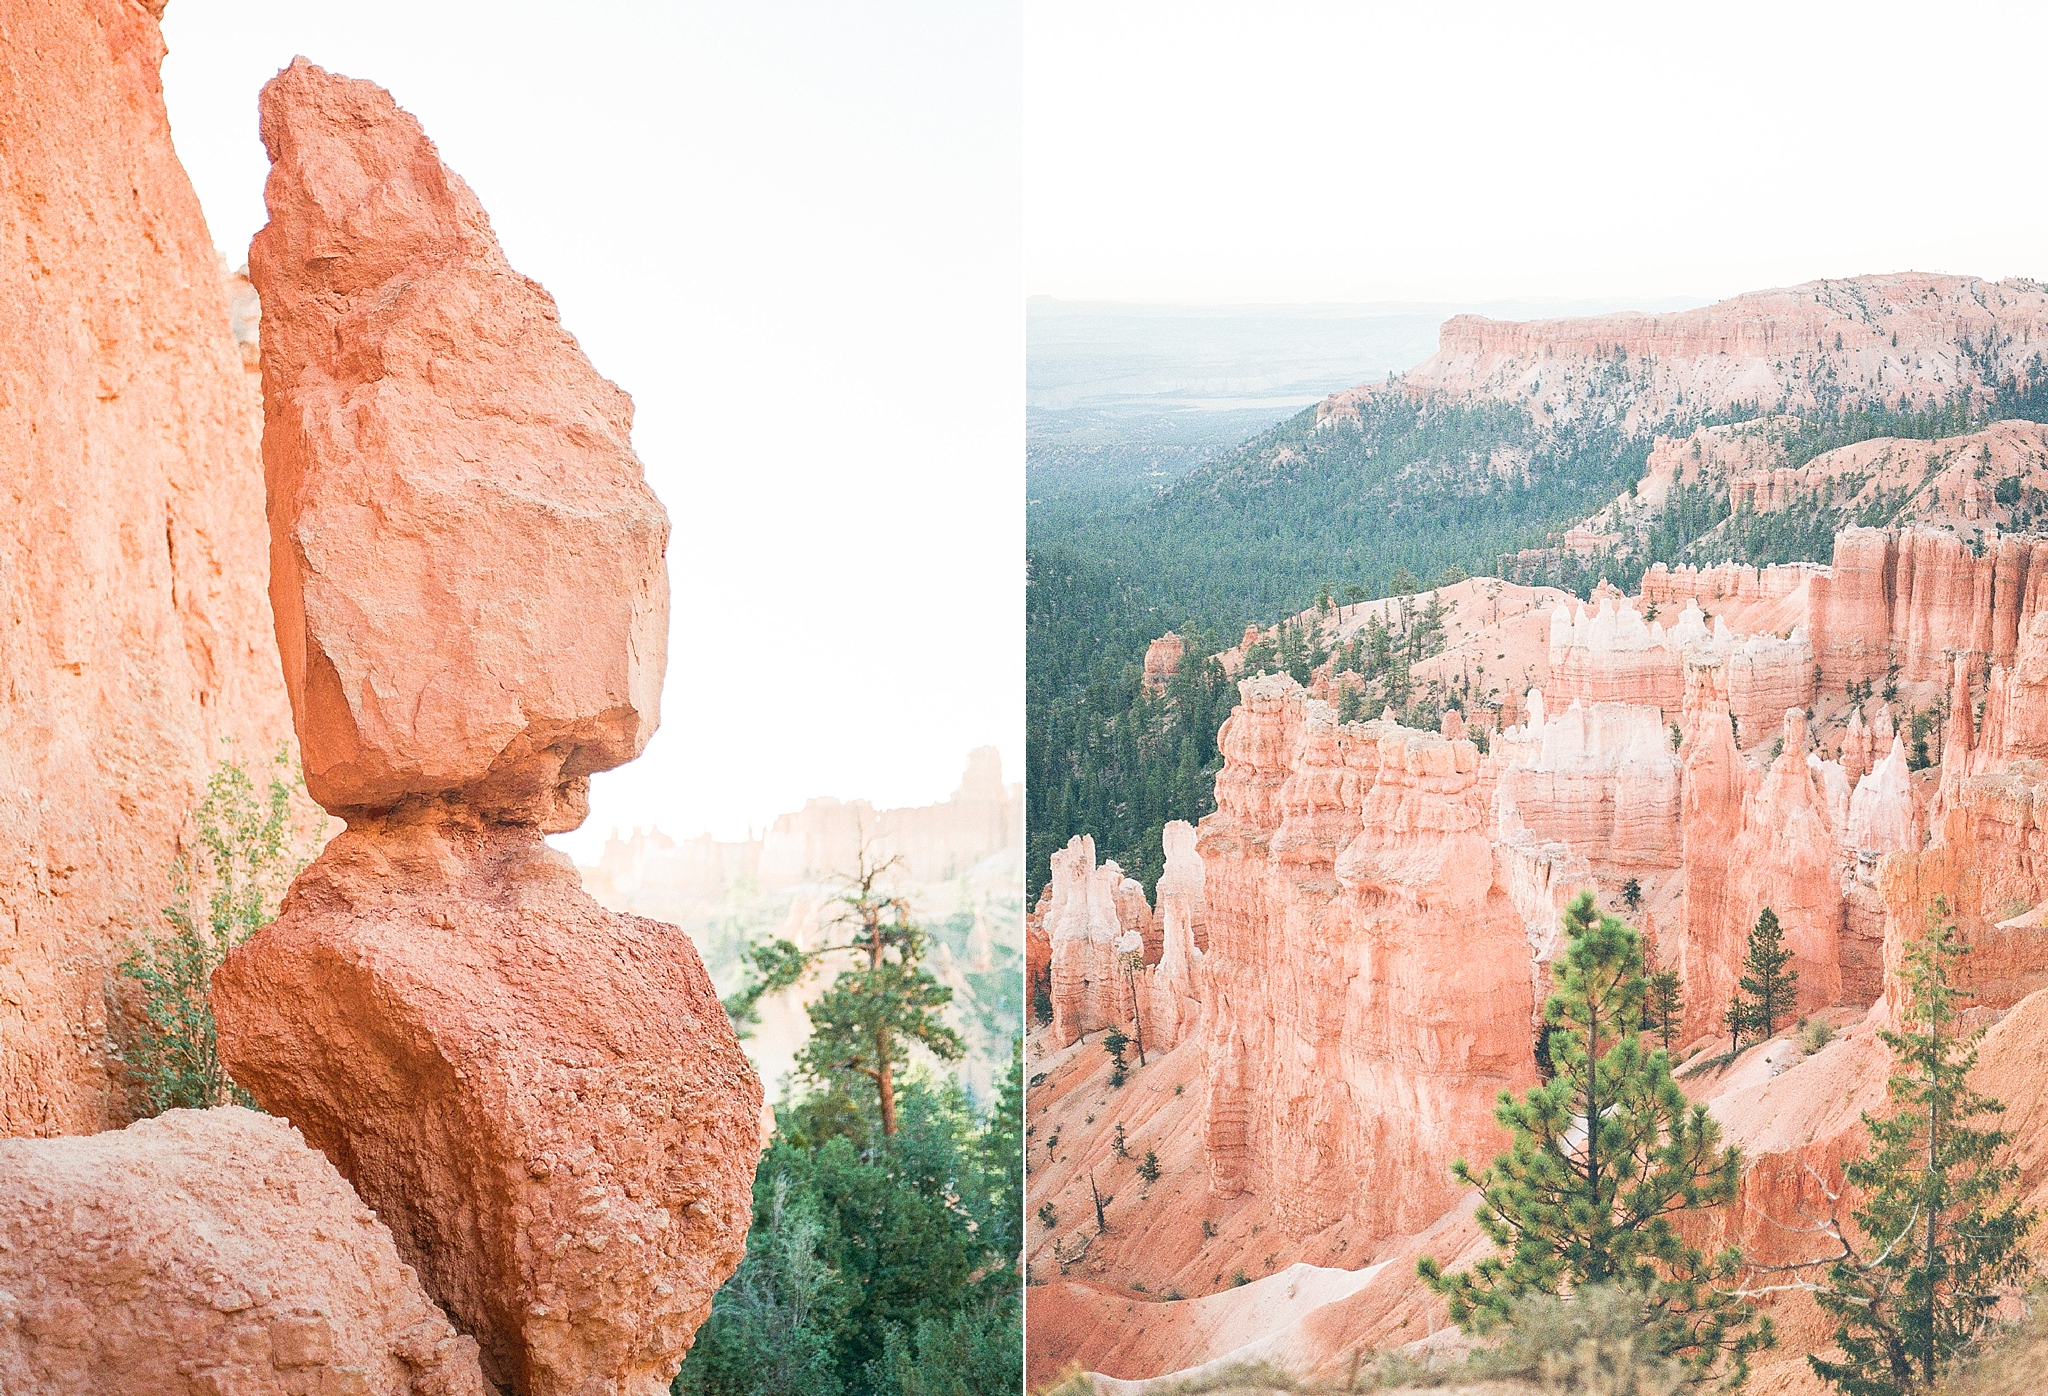 The National Park of Utah and Arizona, including Zion, Bryce, Grand Canyon, and Antelope Canyon, are captured on film by fine art photographer, Alicia Lacey.